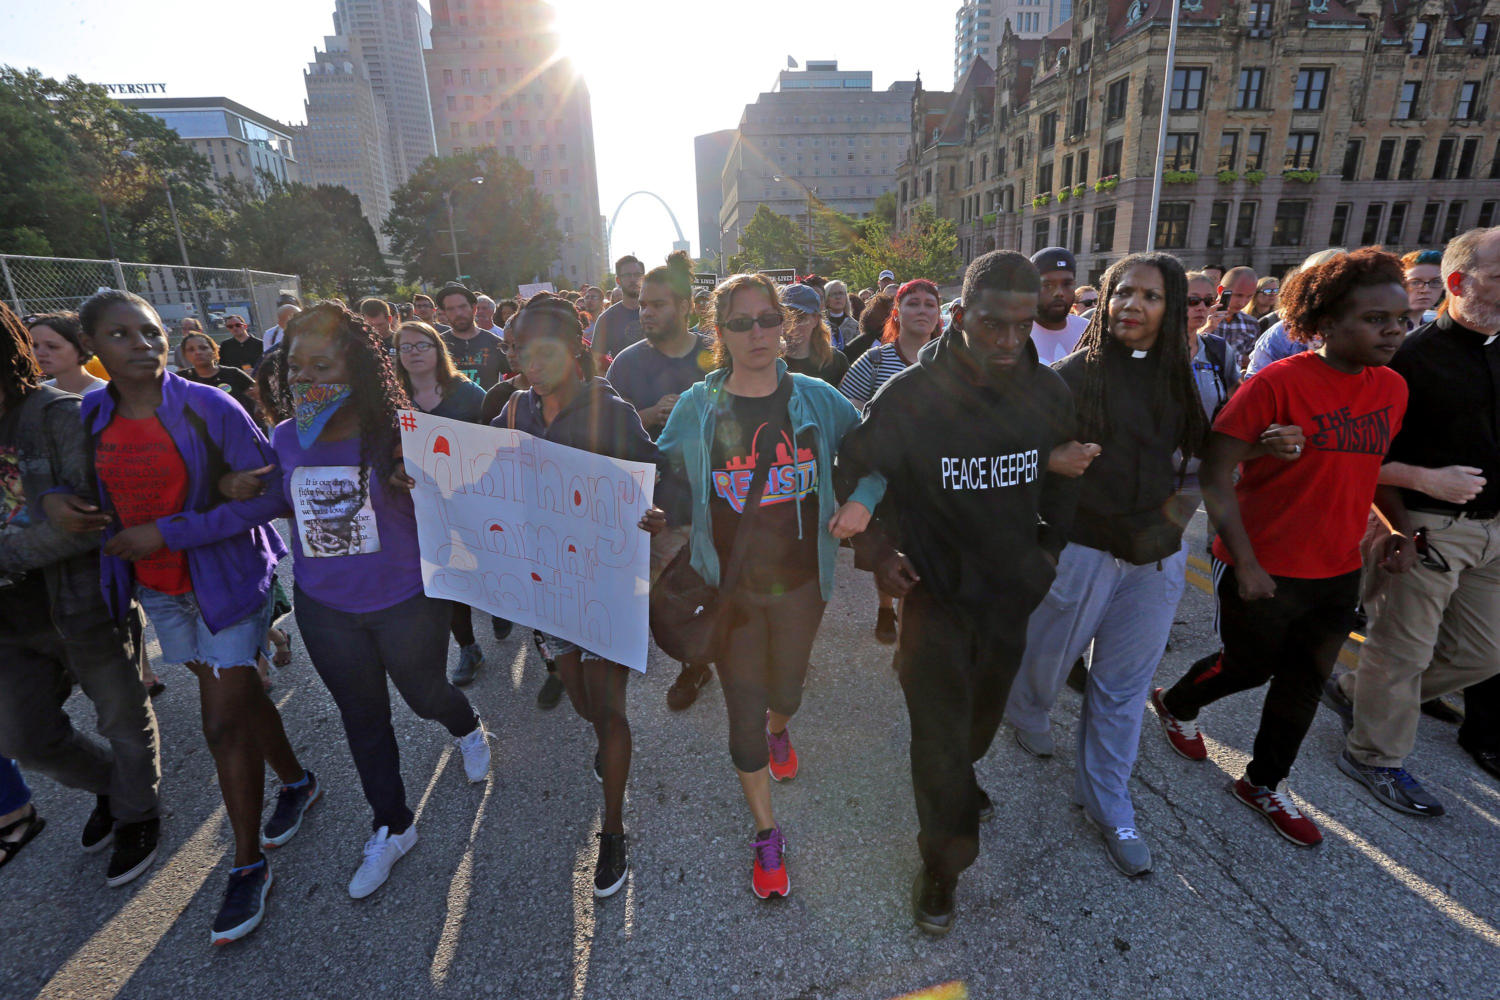 Rep. Bruce Franks Jr., D-St. Louis (third from right) leads a silent march on Market Street on Monday, Sept. 17, 2017. (Cristina M. Fletes/St. Louis Post-Dispatch/TNS)